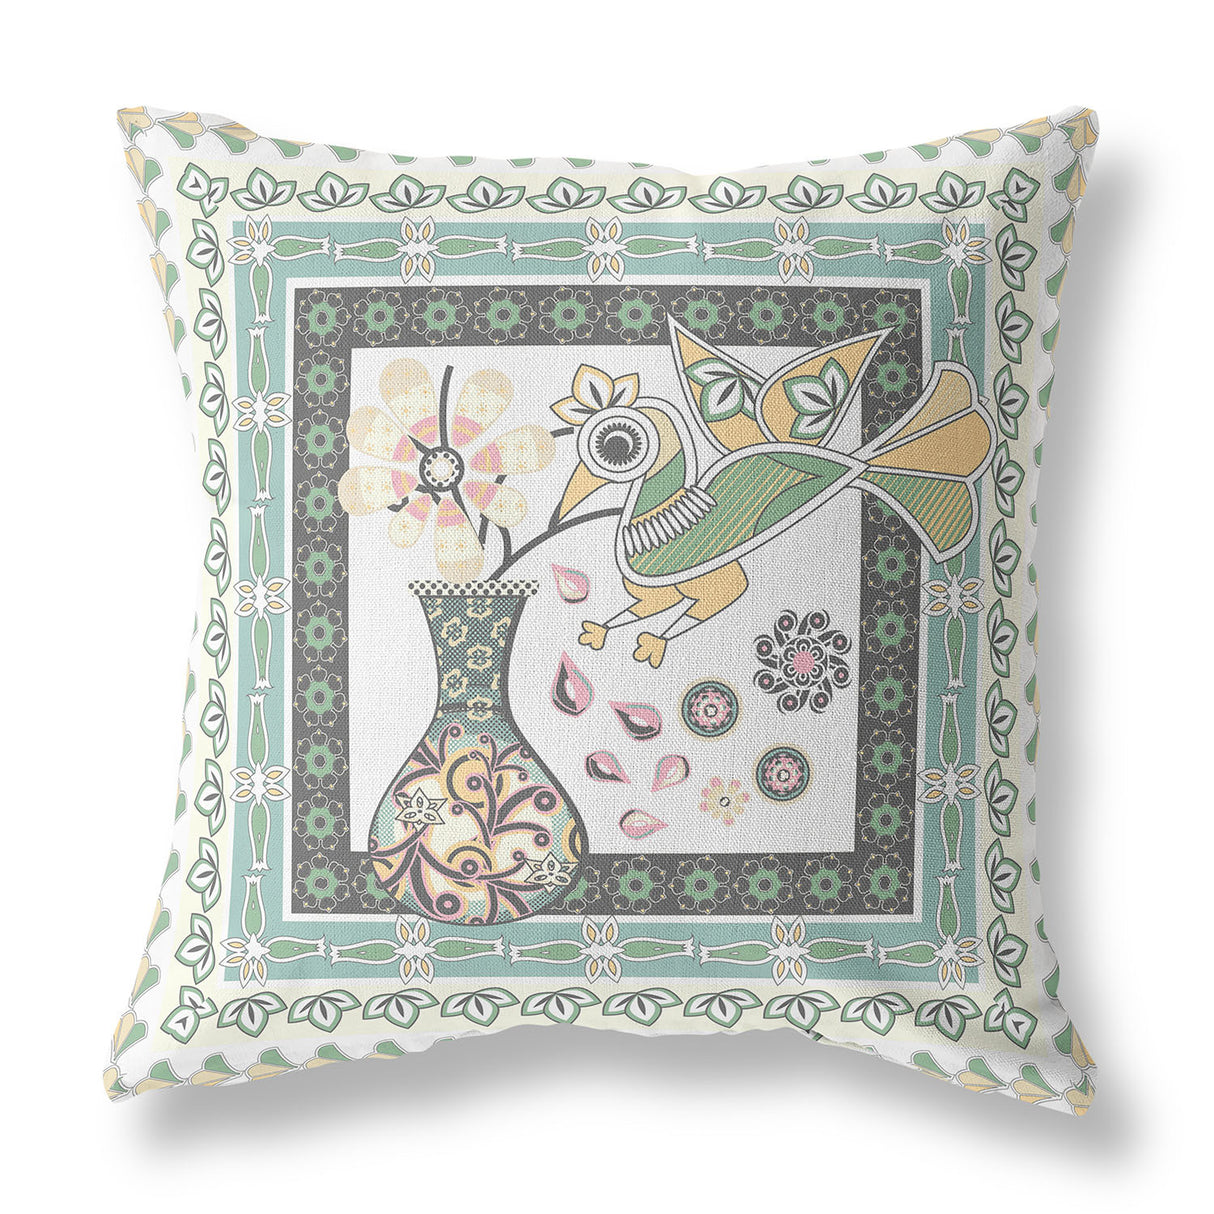 20" x 20" Green and White Bird Blown Seam Floral Indoor Outdoor Throw Pillow